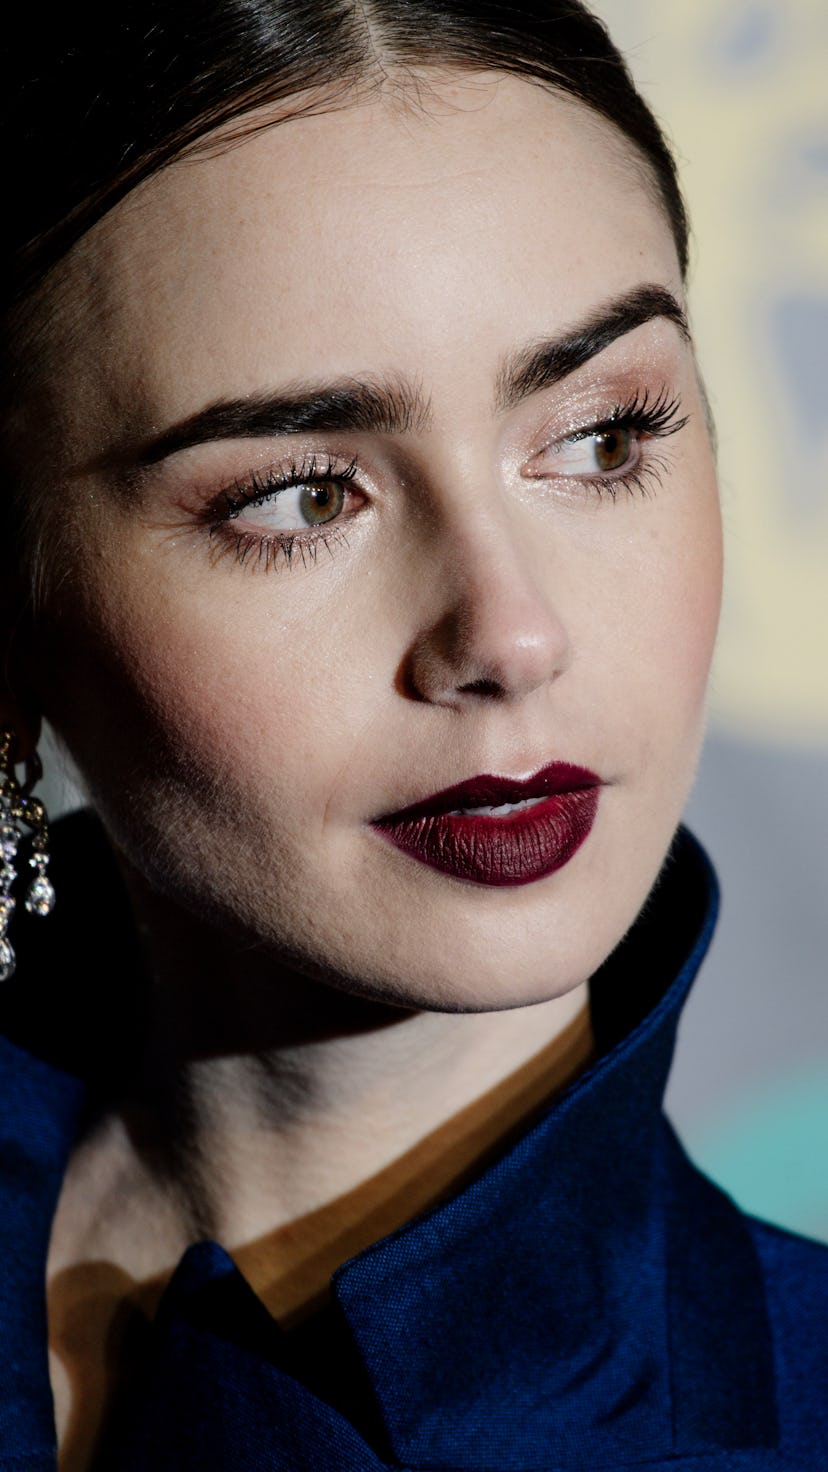 Lily Collins wears dark lipstick, along with a middle part, and her hair pulled back